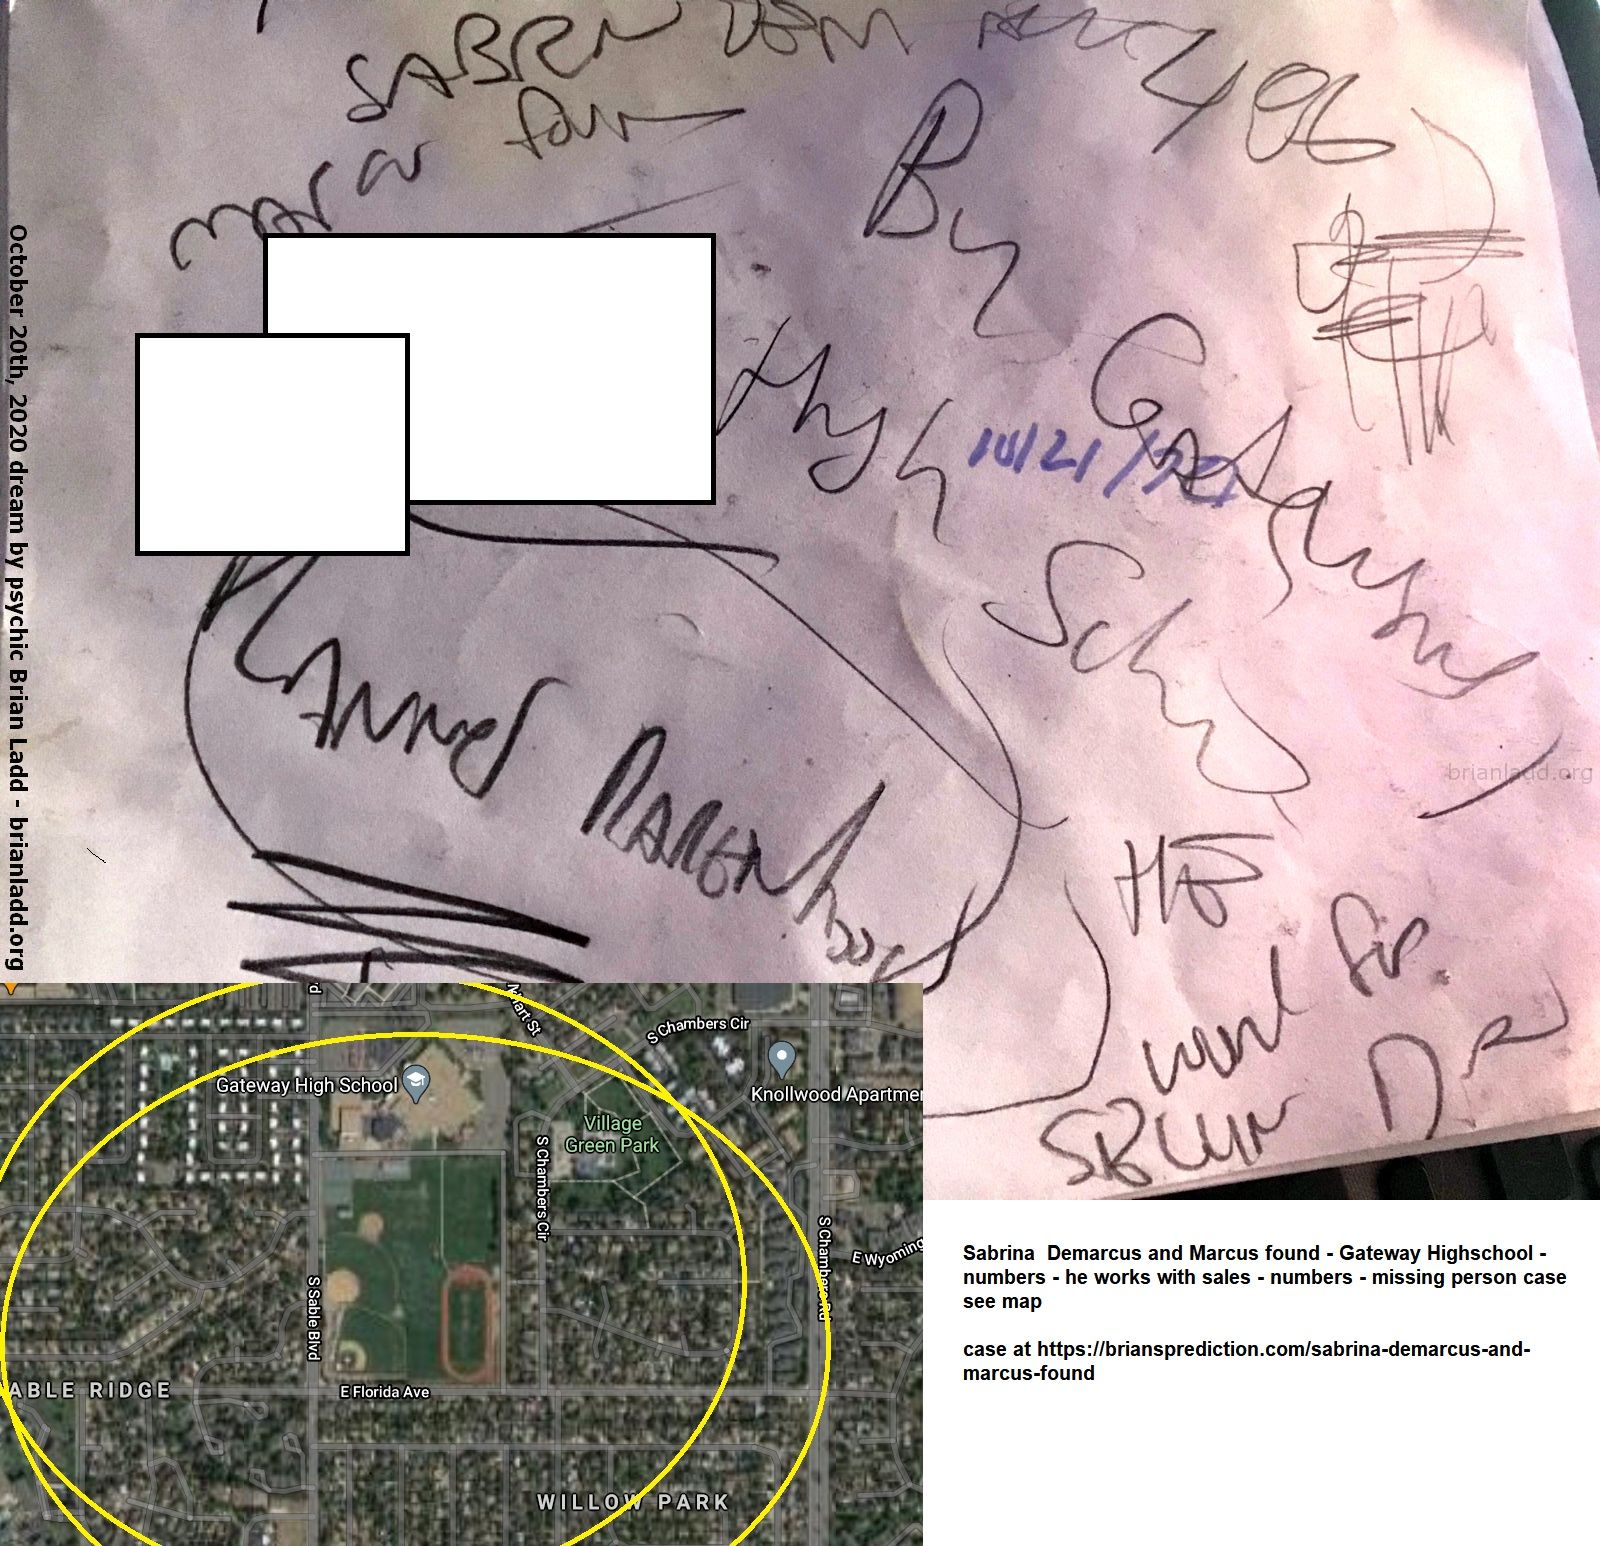 Sabrina Demarcus And Marcus Found Gateway Highschool Numbers He Works With Sales Numbers Missing Person Case See Map - S...
Sabrina  Demarcus And Marcus Found - Gateway Highschool - Numbers - He Works With Sales - Numbers - Missing Person Case See Map.  Case At   https://briansprediction.com/Sabrina-Demarcus-And-Marcus-found
